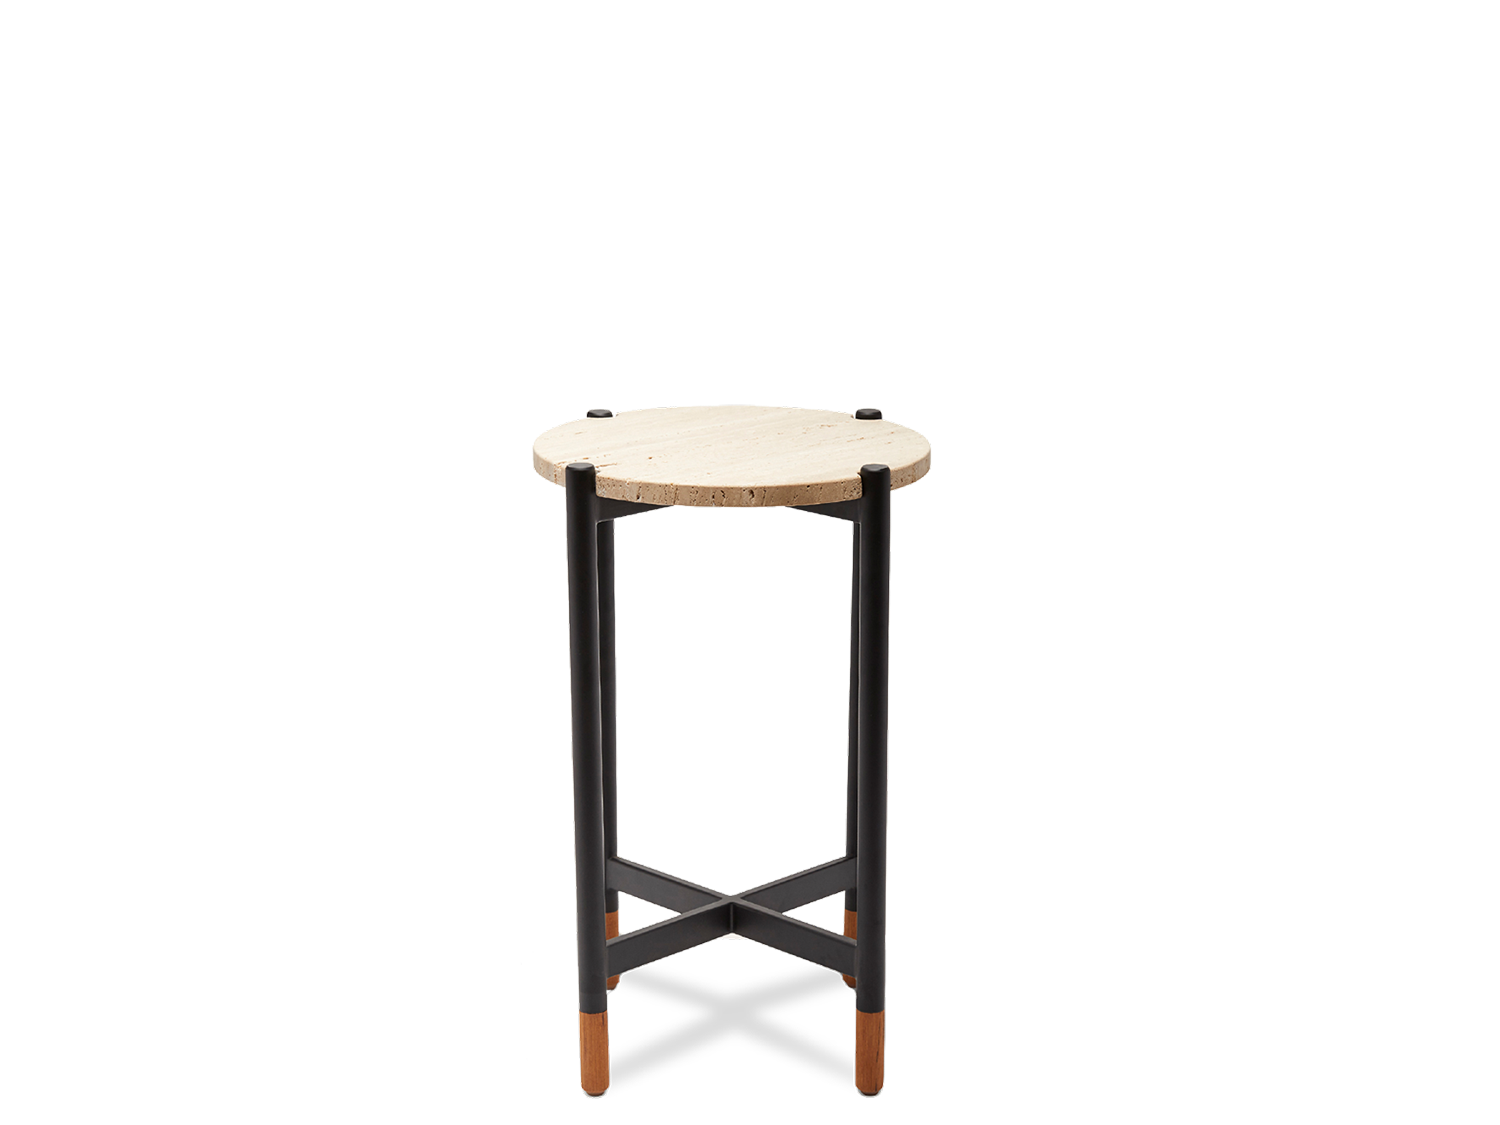 Bronson Drinks Table - Outdoor